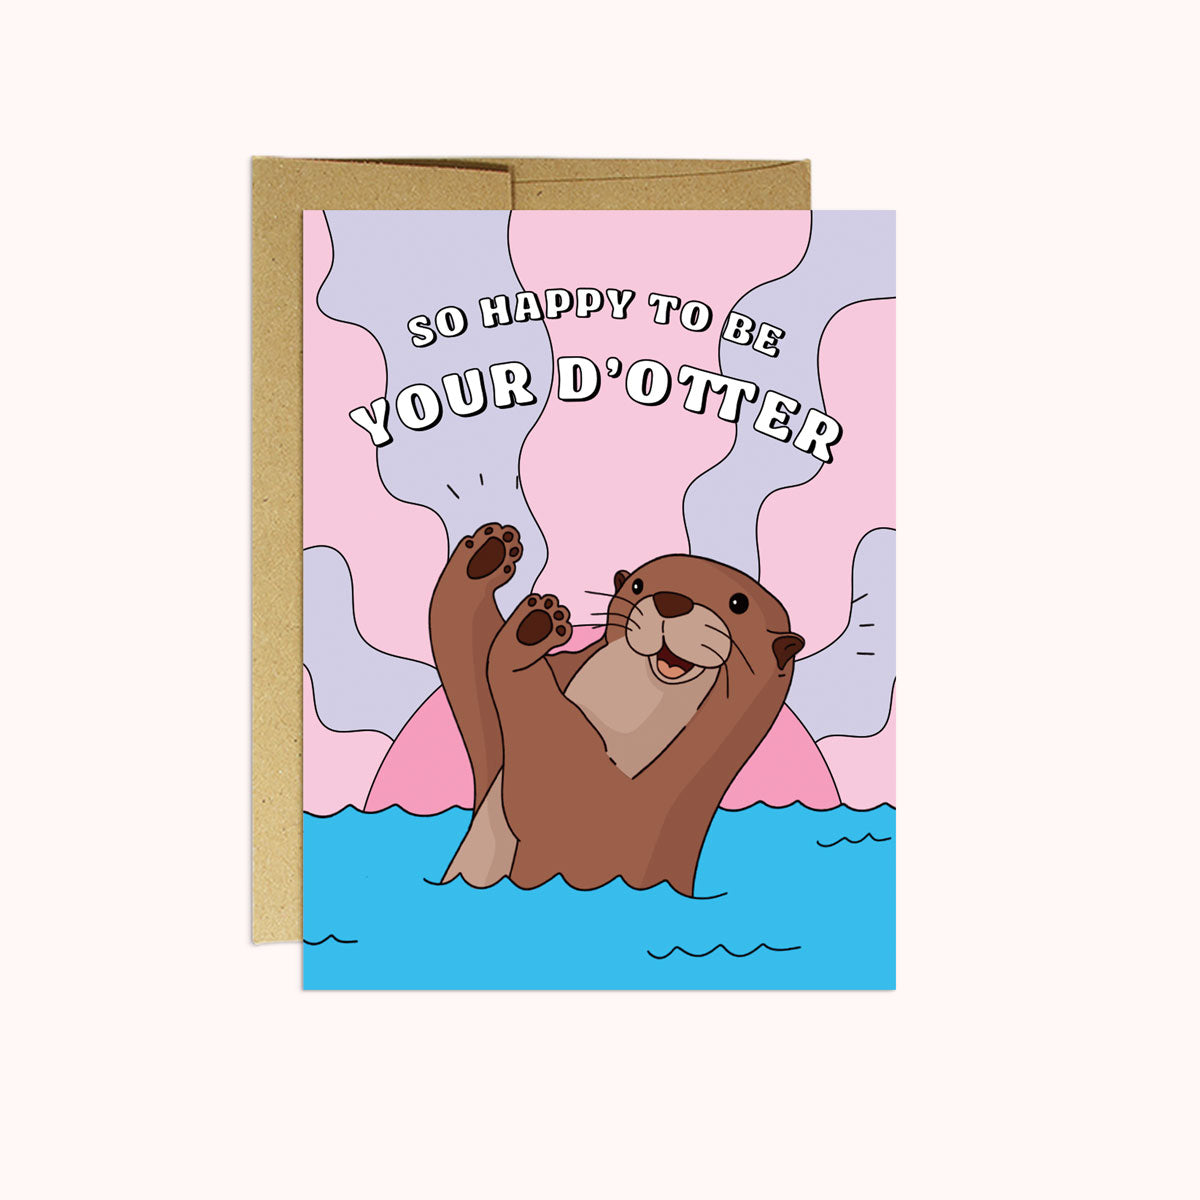 Happy To Be Your D-Otter Card